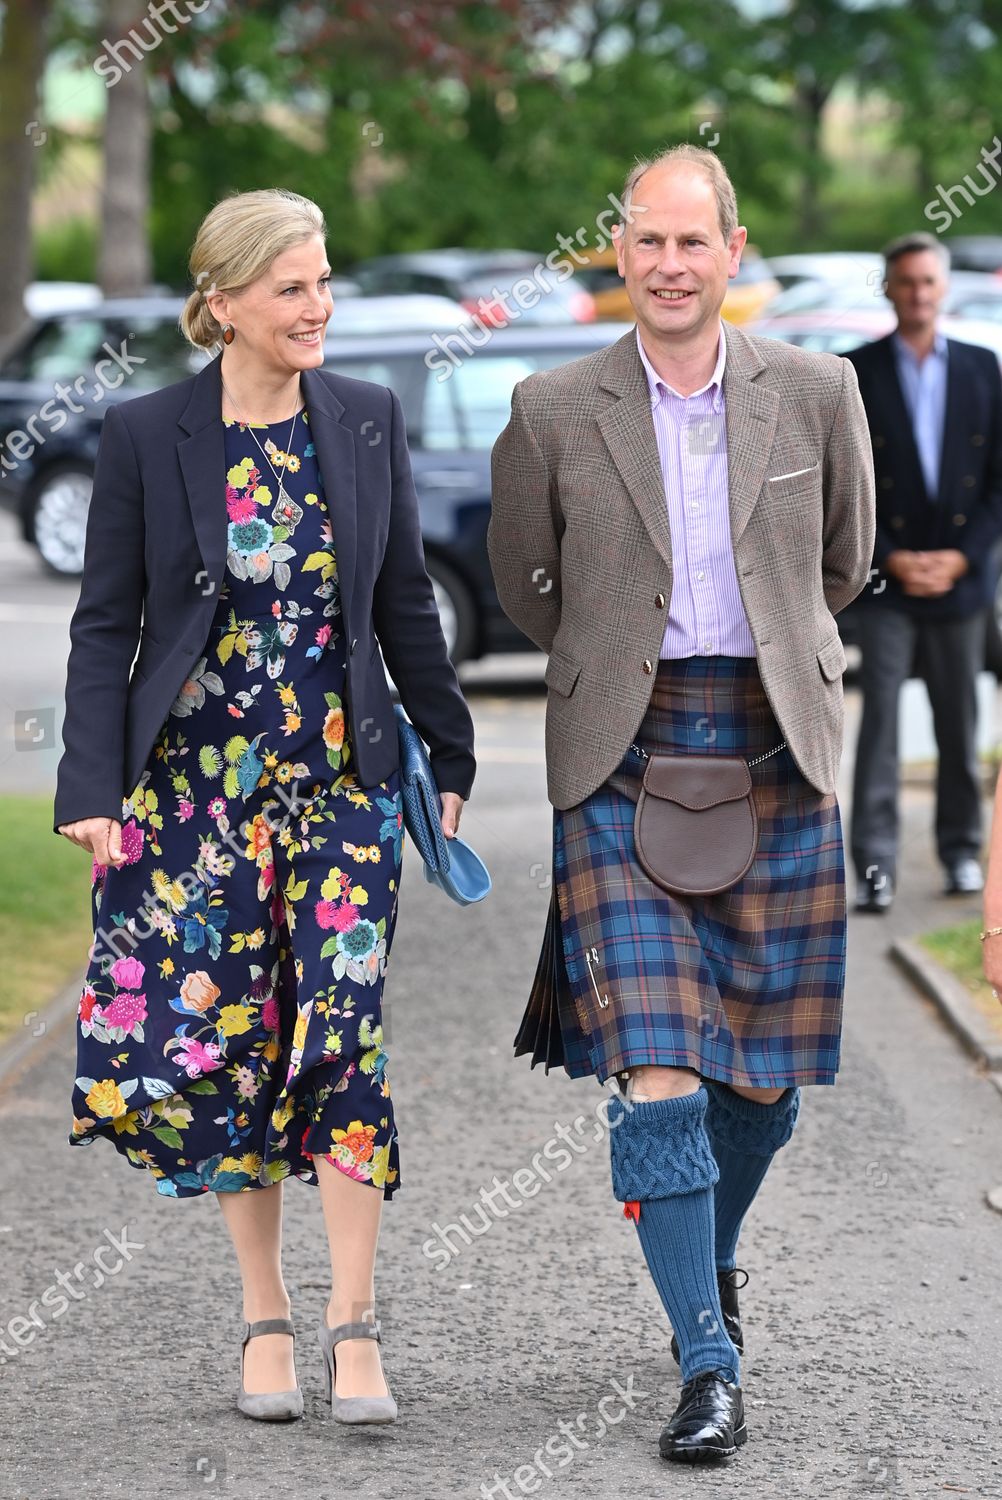 prince-edward-and-sophie-countess-of-wessex-visit-to-forfar-golf-club-scotland-uk-shutterstock-editorial-12172307al.jpg